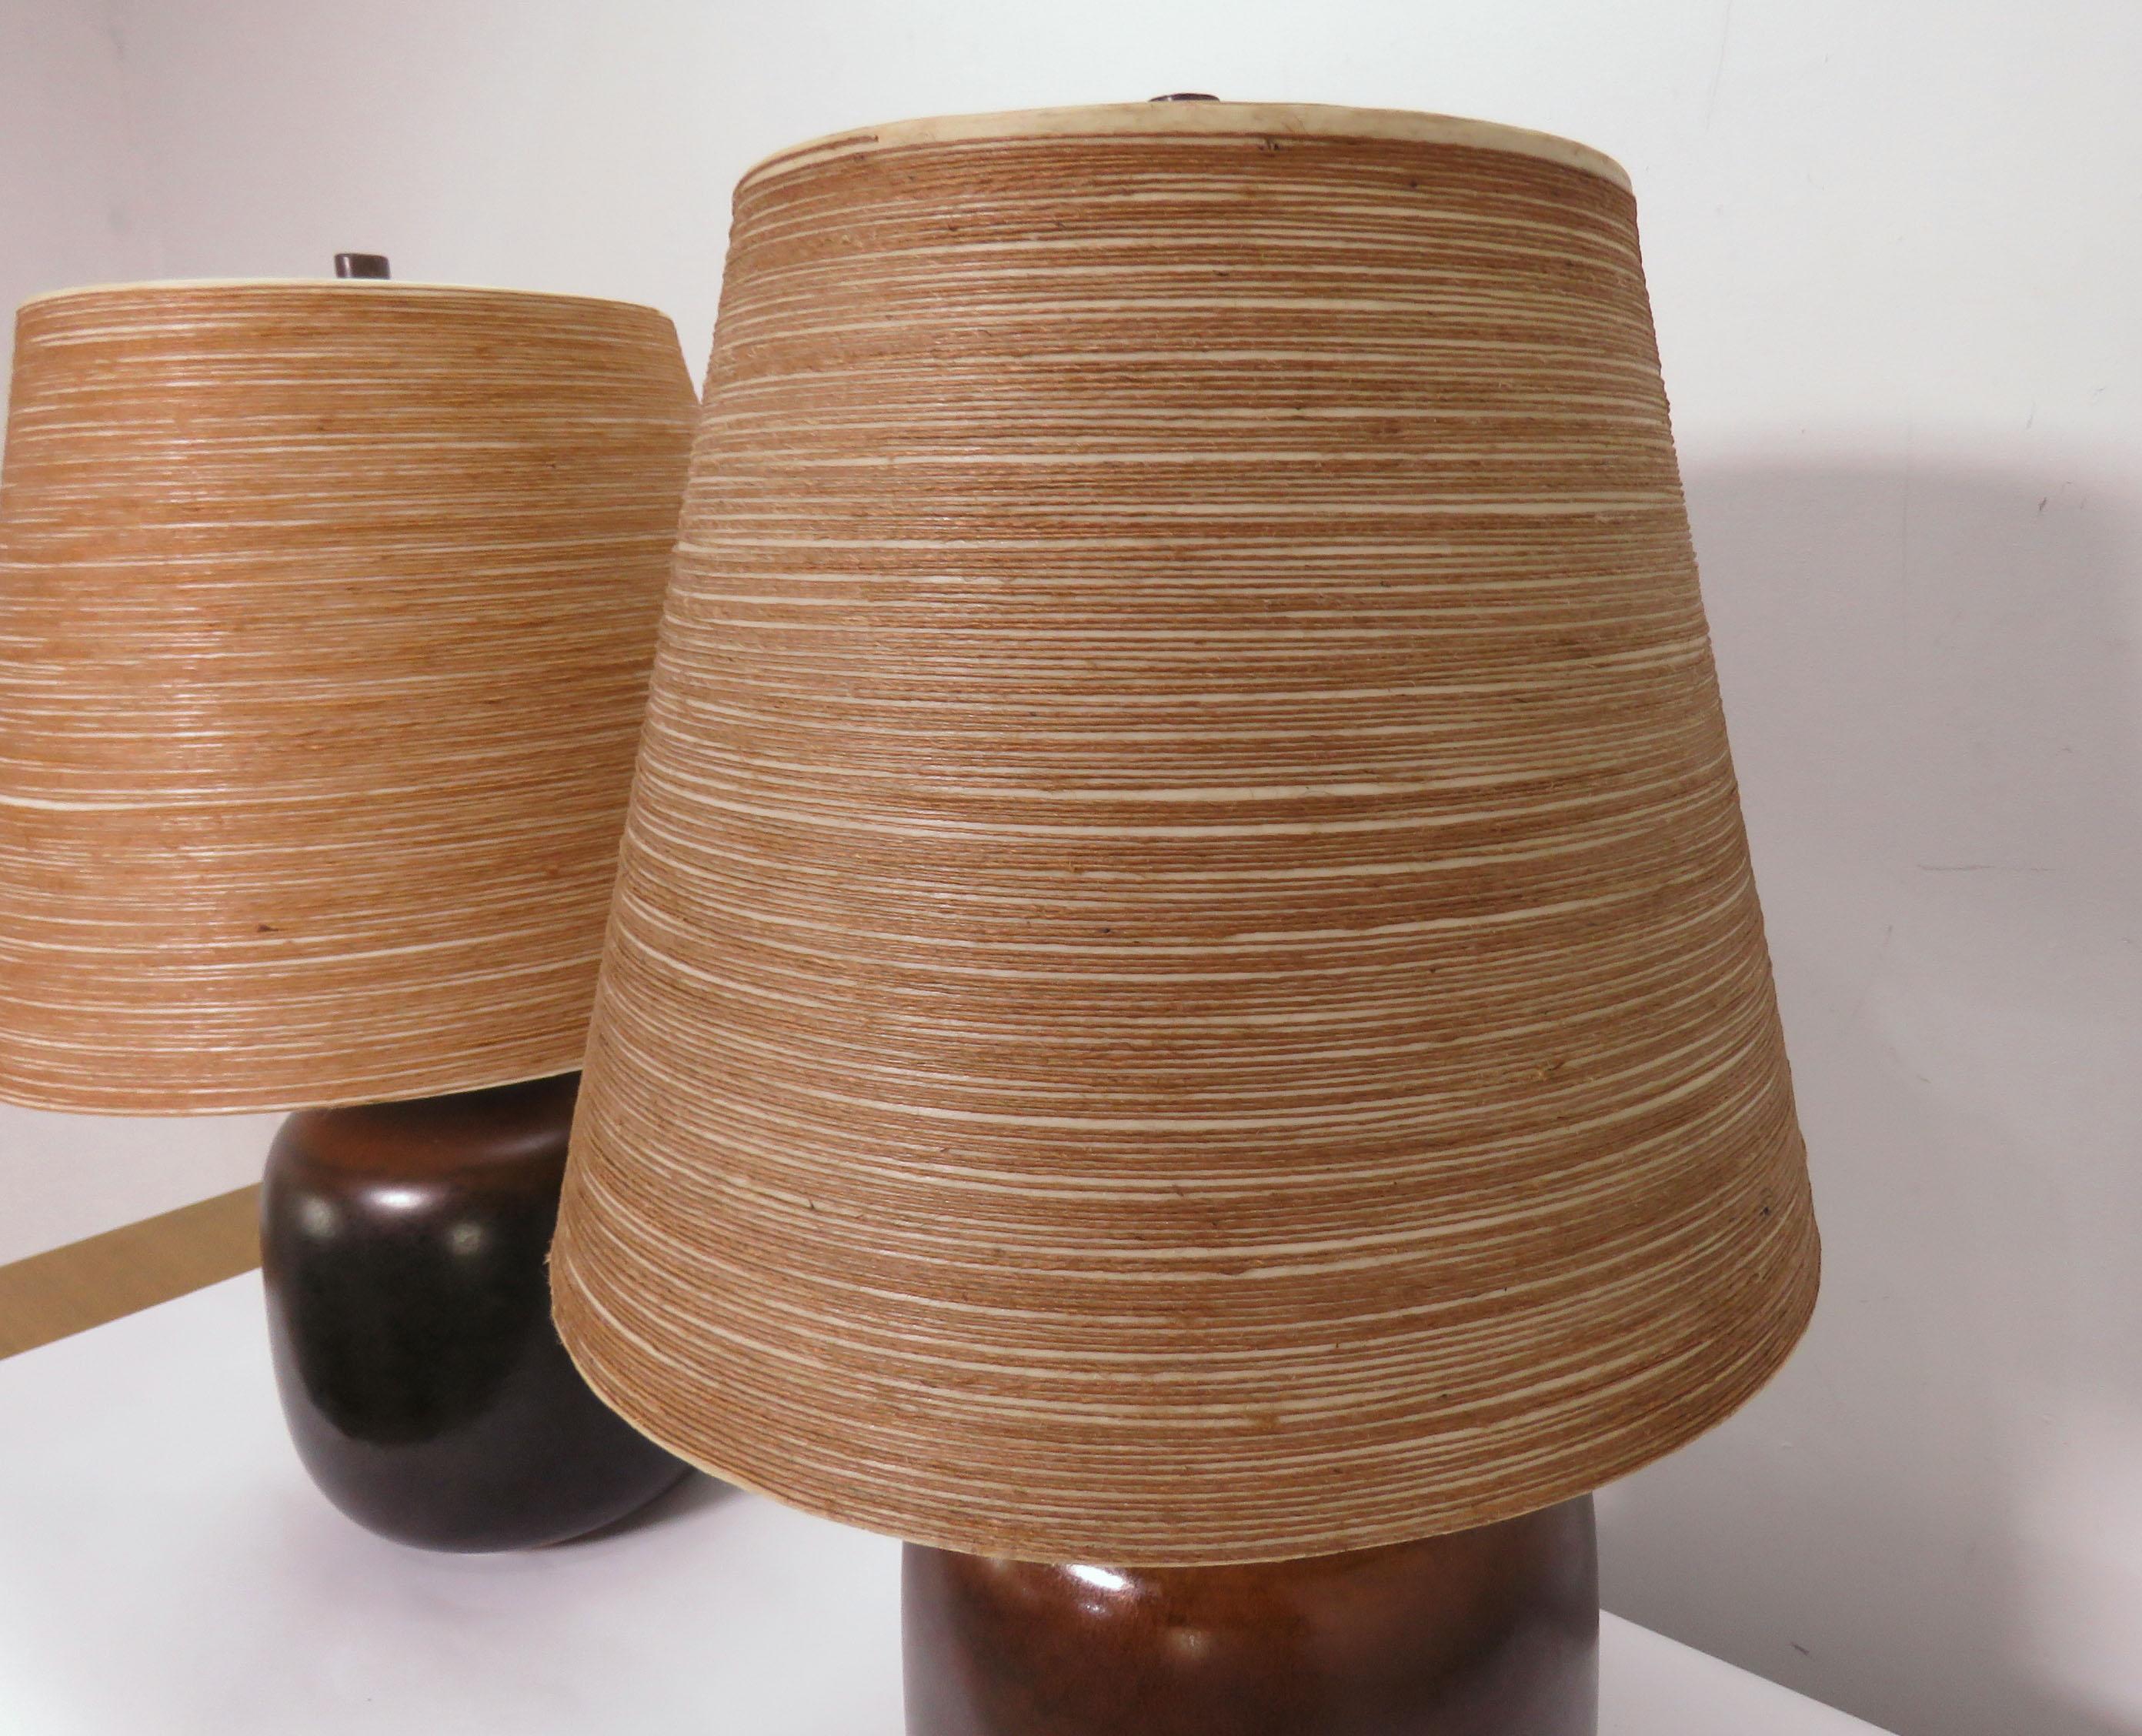 Pair of Lotte & Gunnar Bostlund Art Pottery Table Lamps, circa 1970s 1